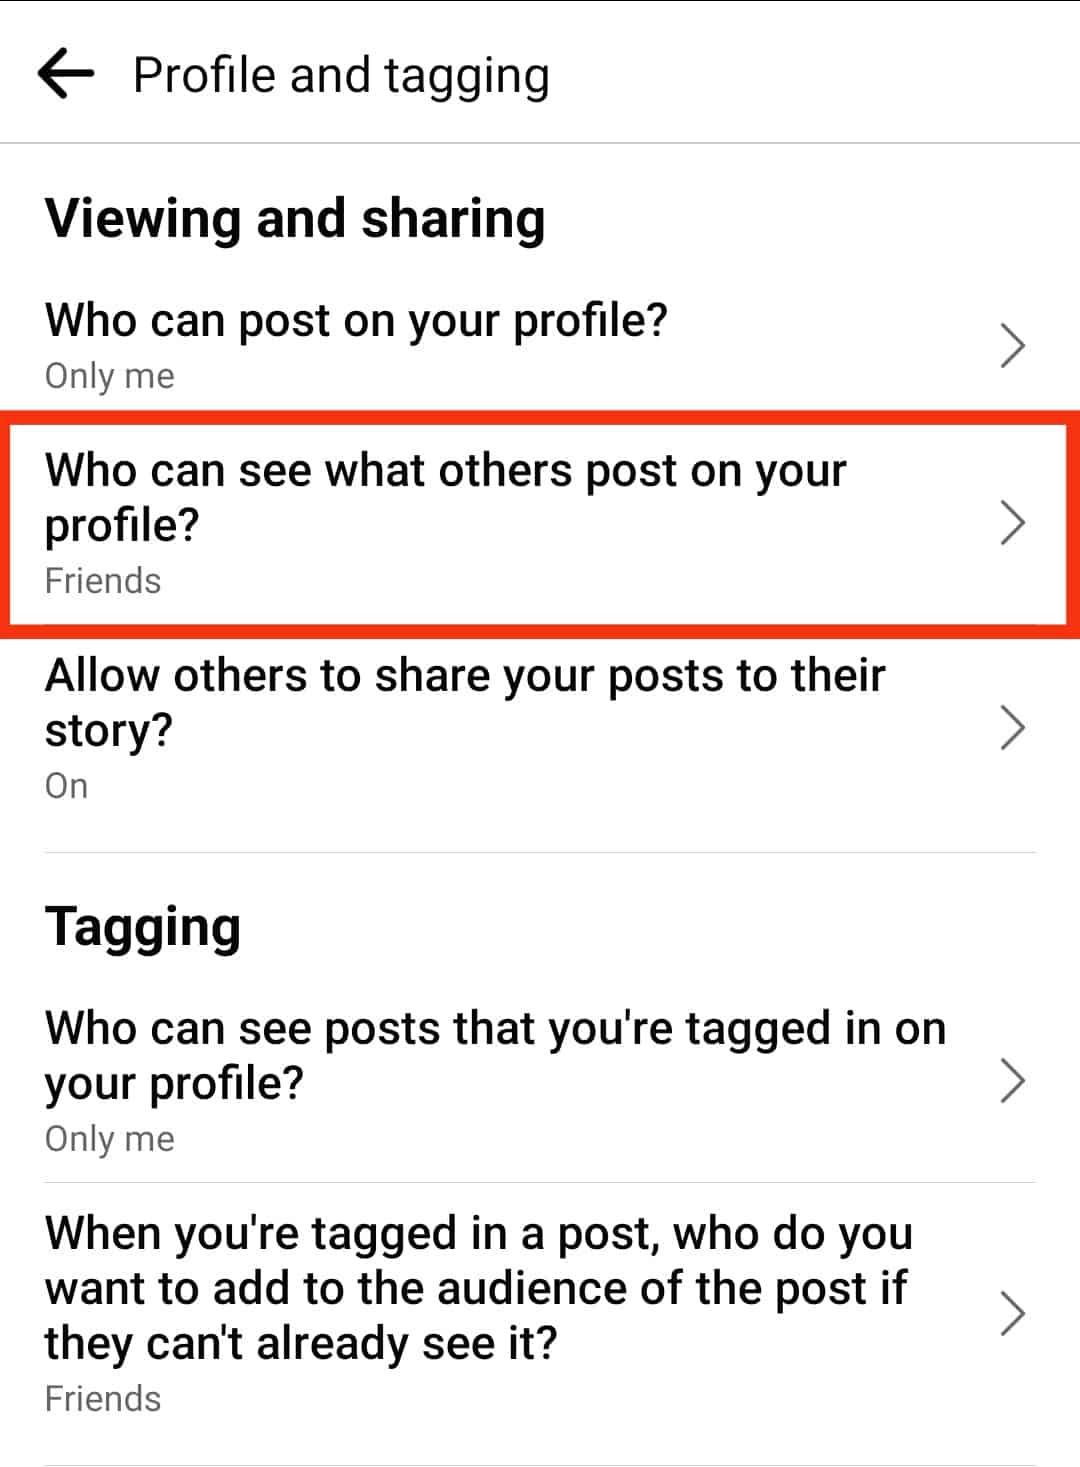 Who Can See What Others Post On Your Profile